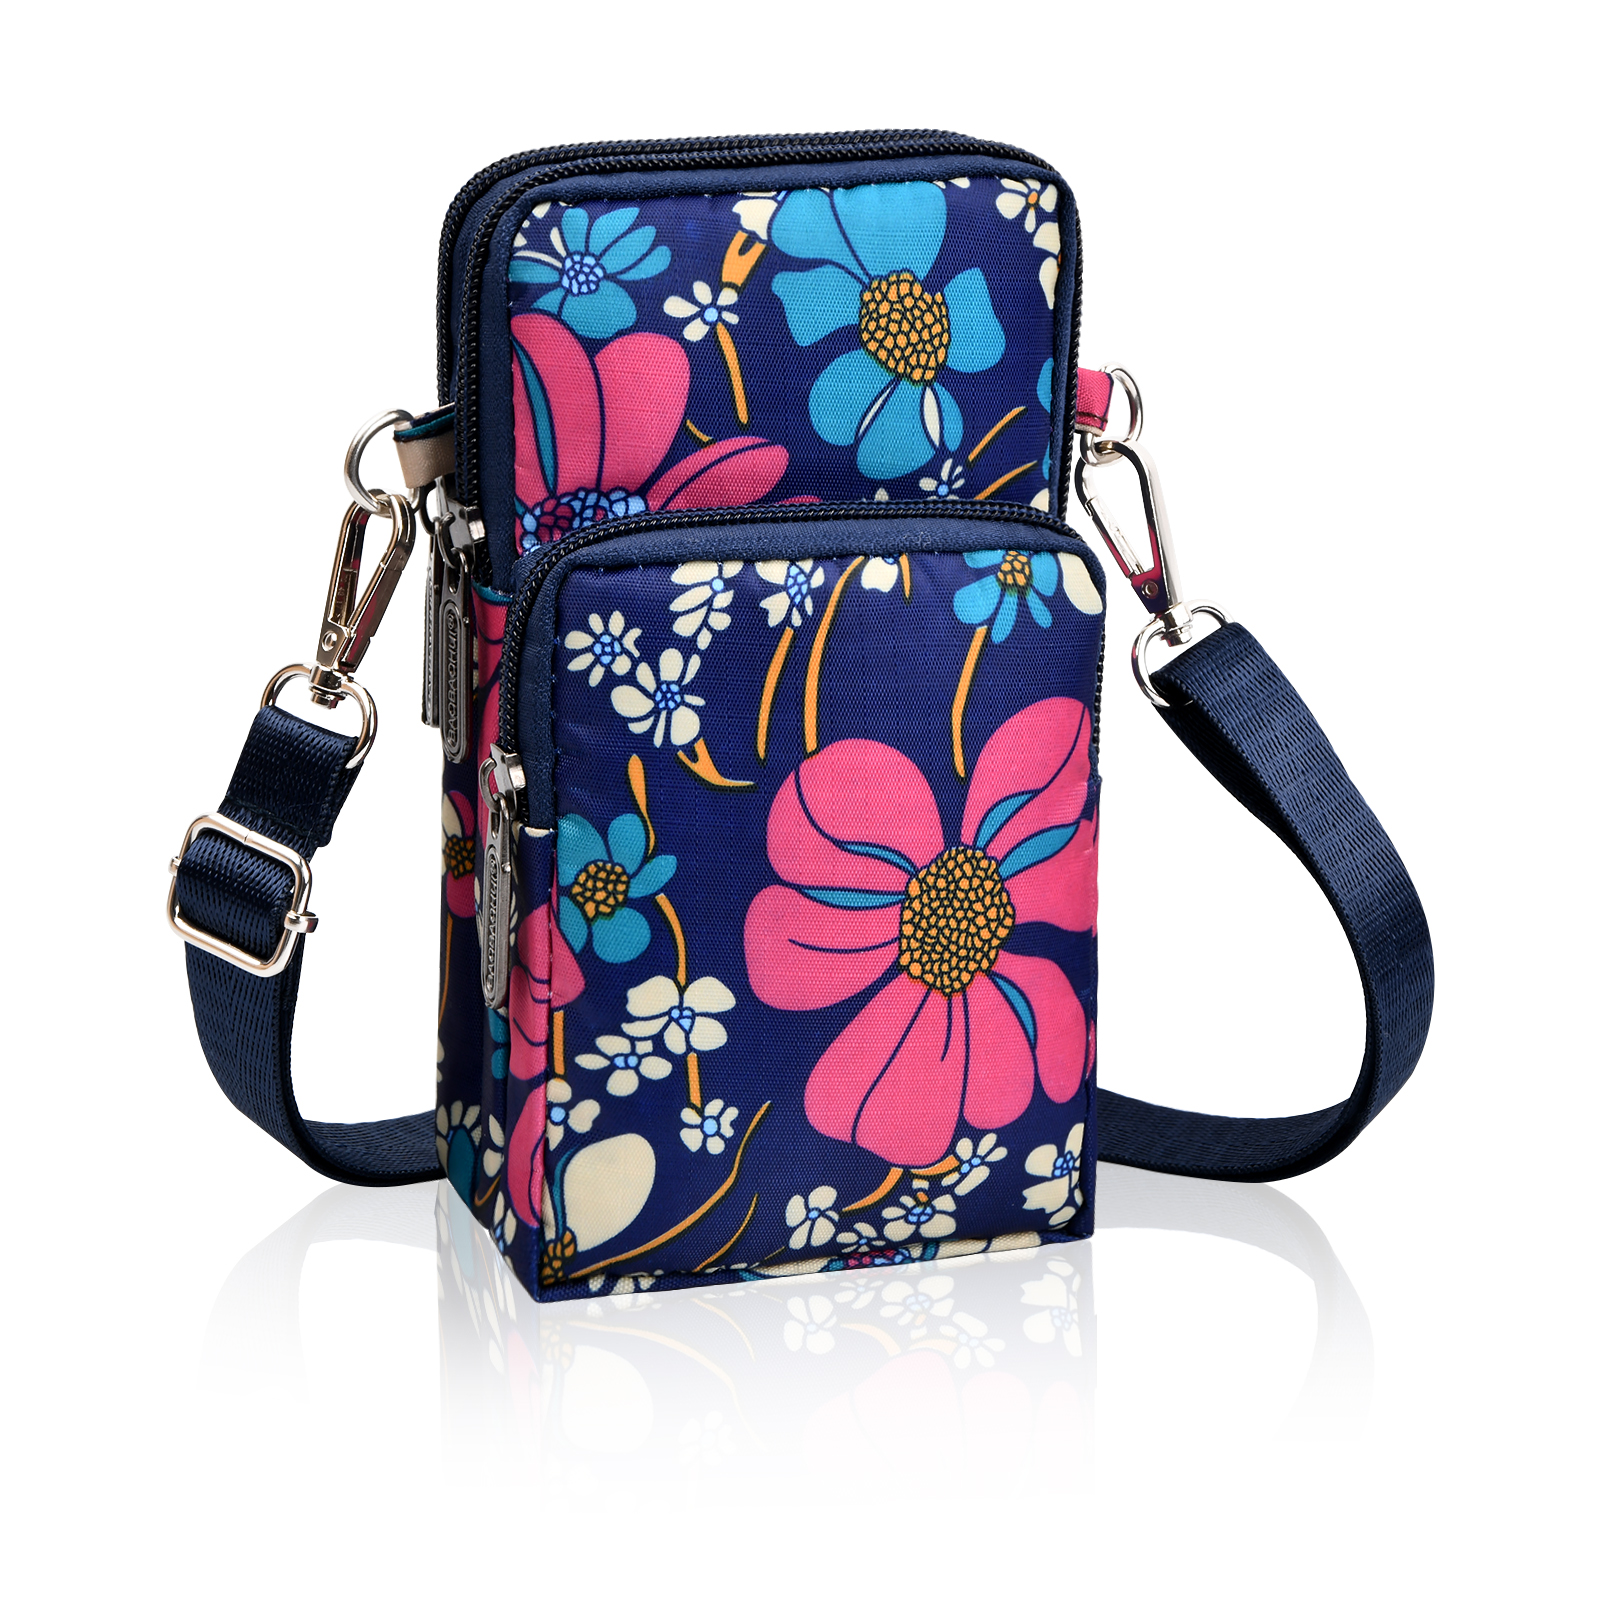 Cell Phone Purse Small Crossbody Bag for Women Multifunction 